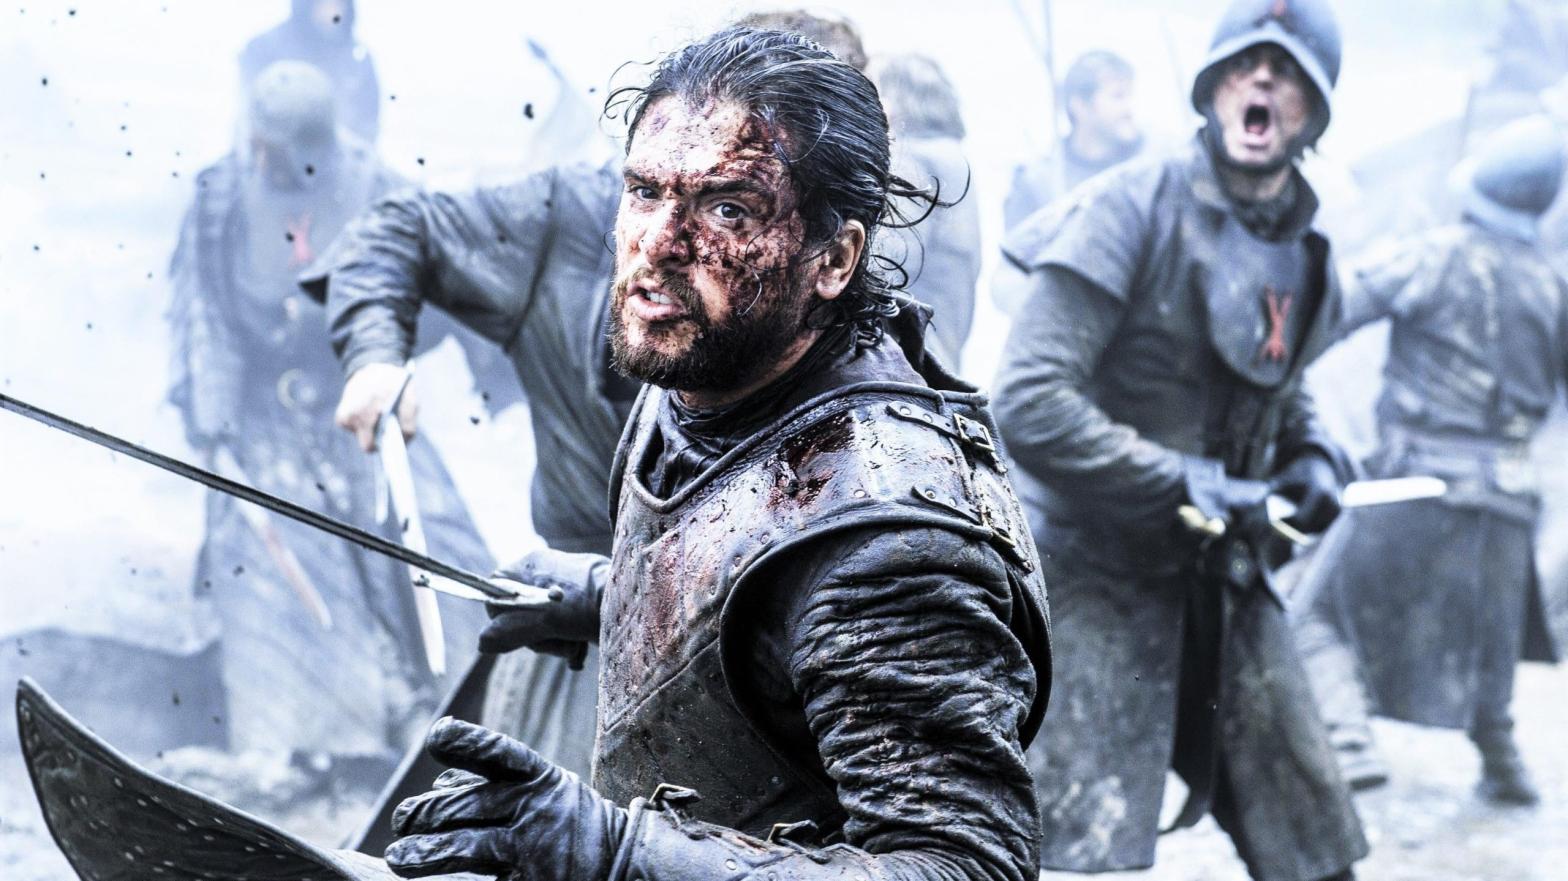 Jon Snow battles through a Game of Thrones episode we did get to watch. (Image: HBO)